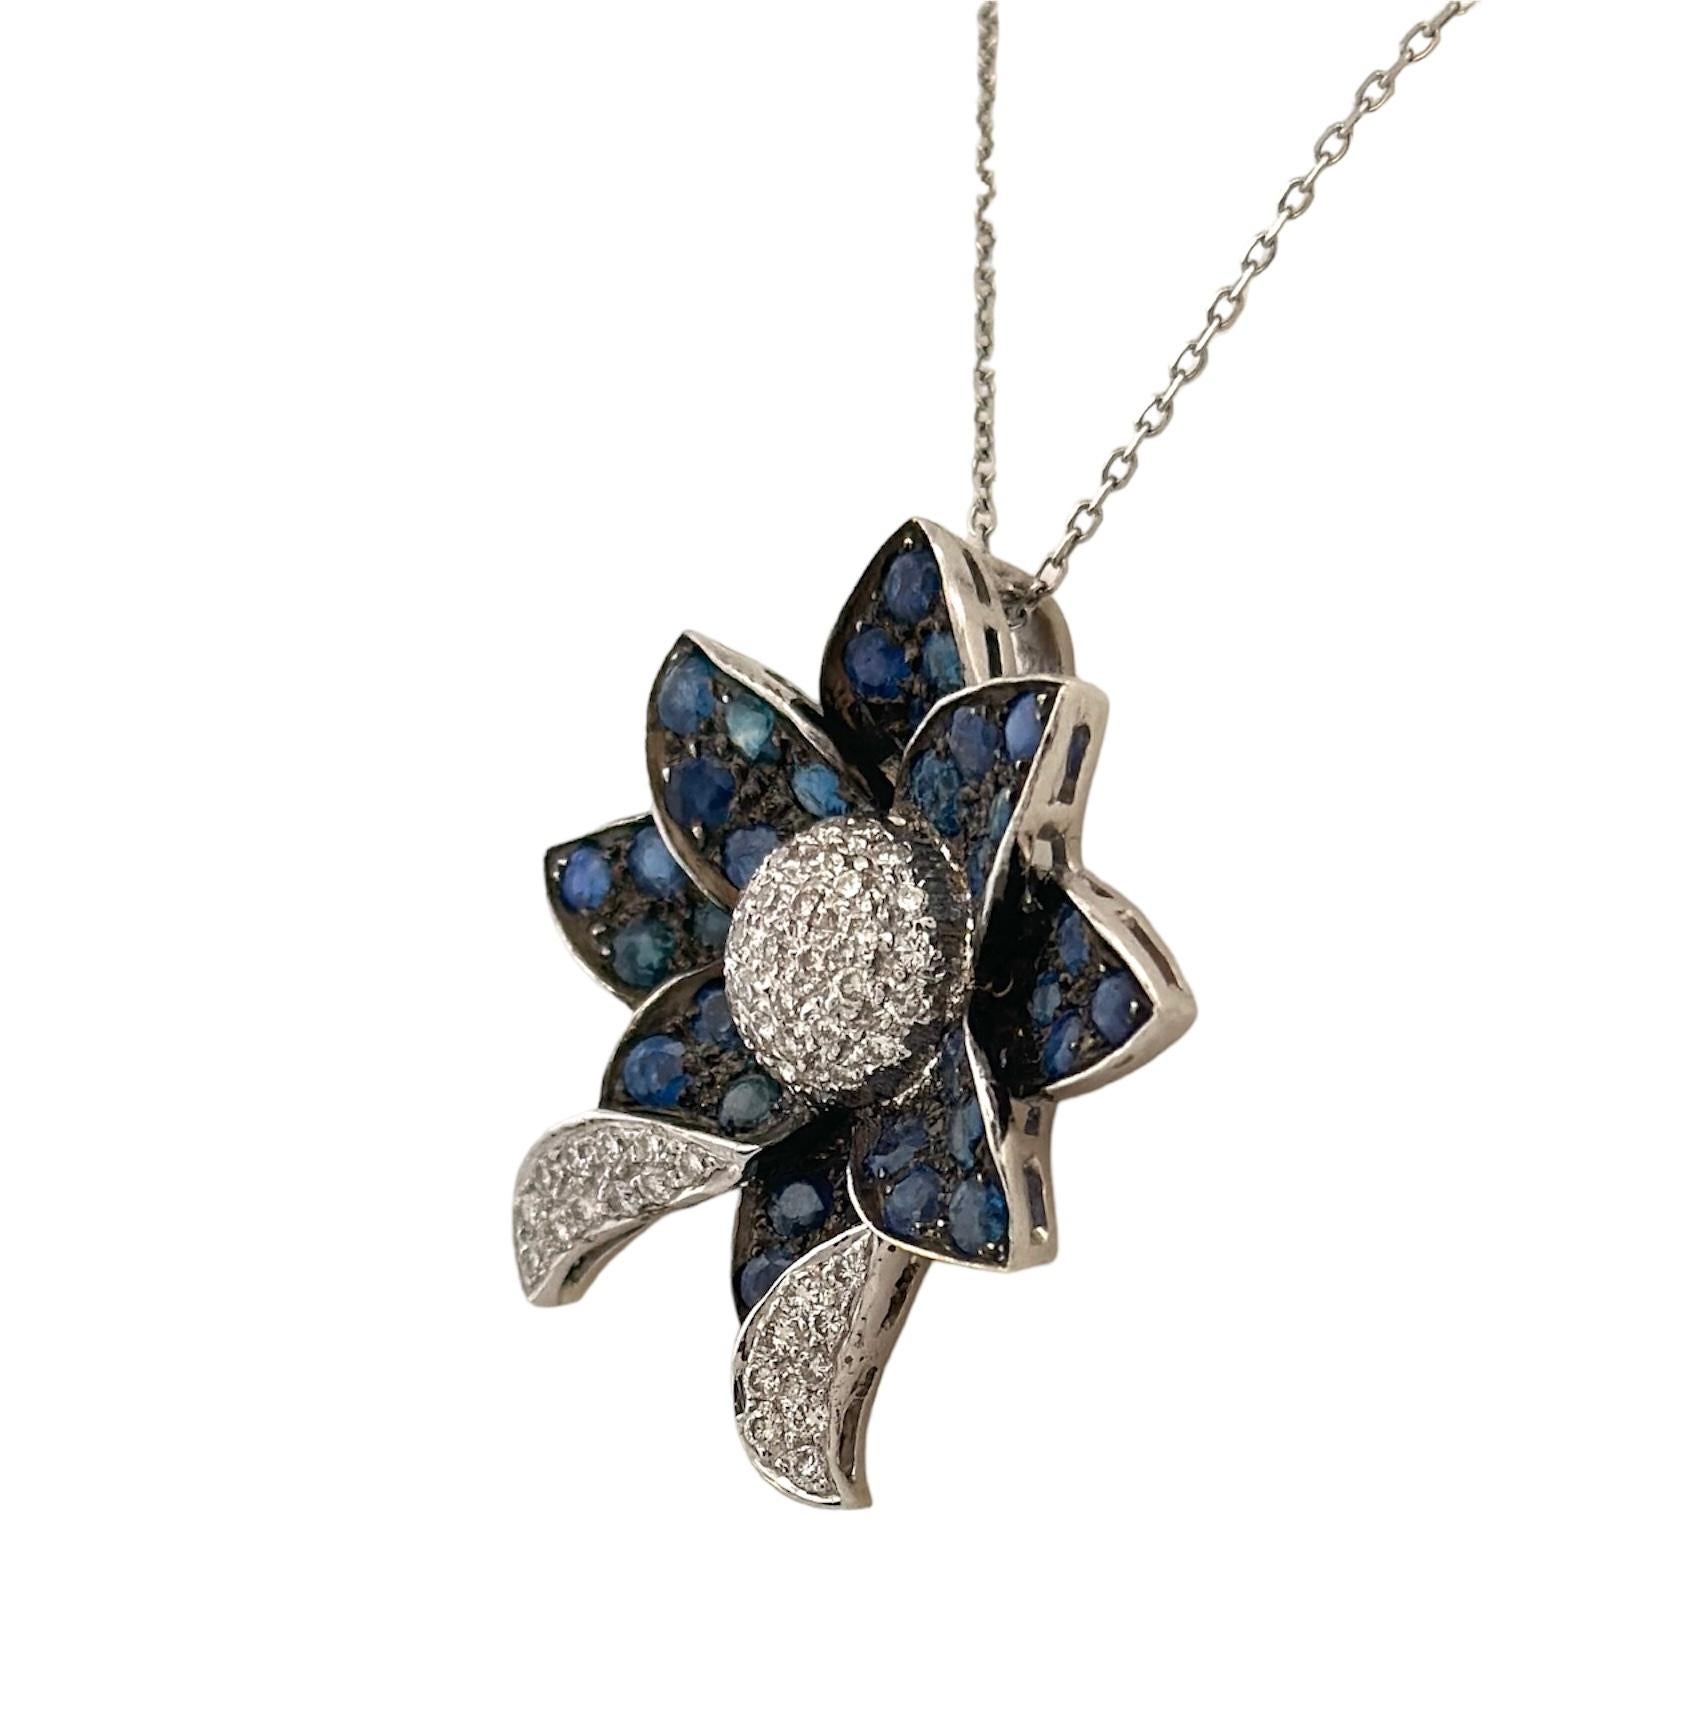 Exemplifying the timeless beauty of the early 20th century, this Flower-Shaped Pendant, adorned with White Diamonds and a Blue Sapphires, is truly a work of art. Weighing a total of 8.2 grams, it boasts an intricate and delicate design. The flower's